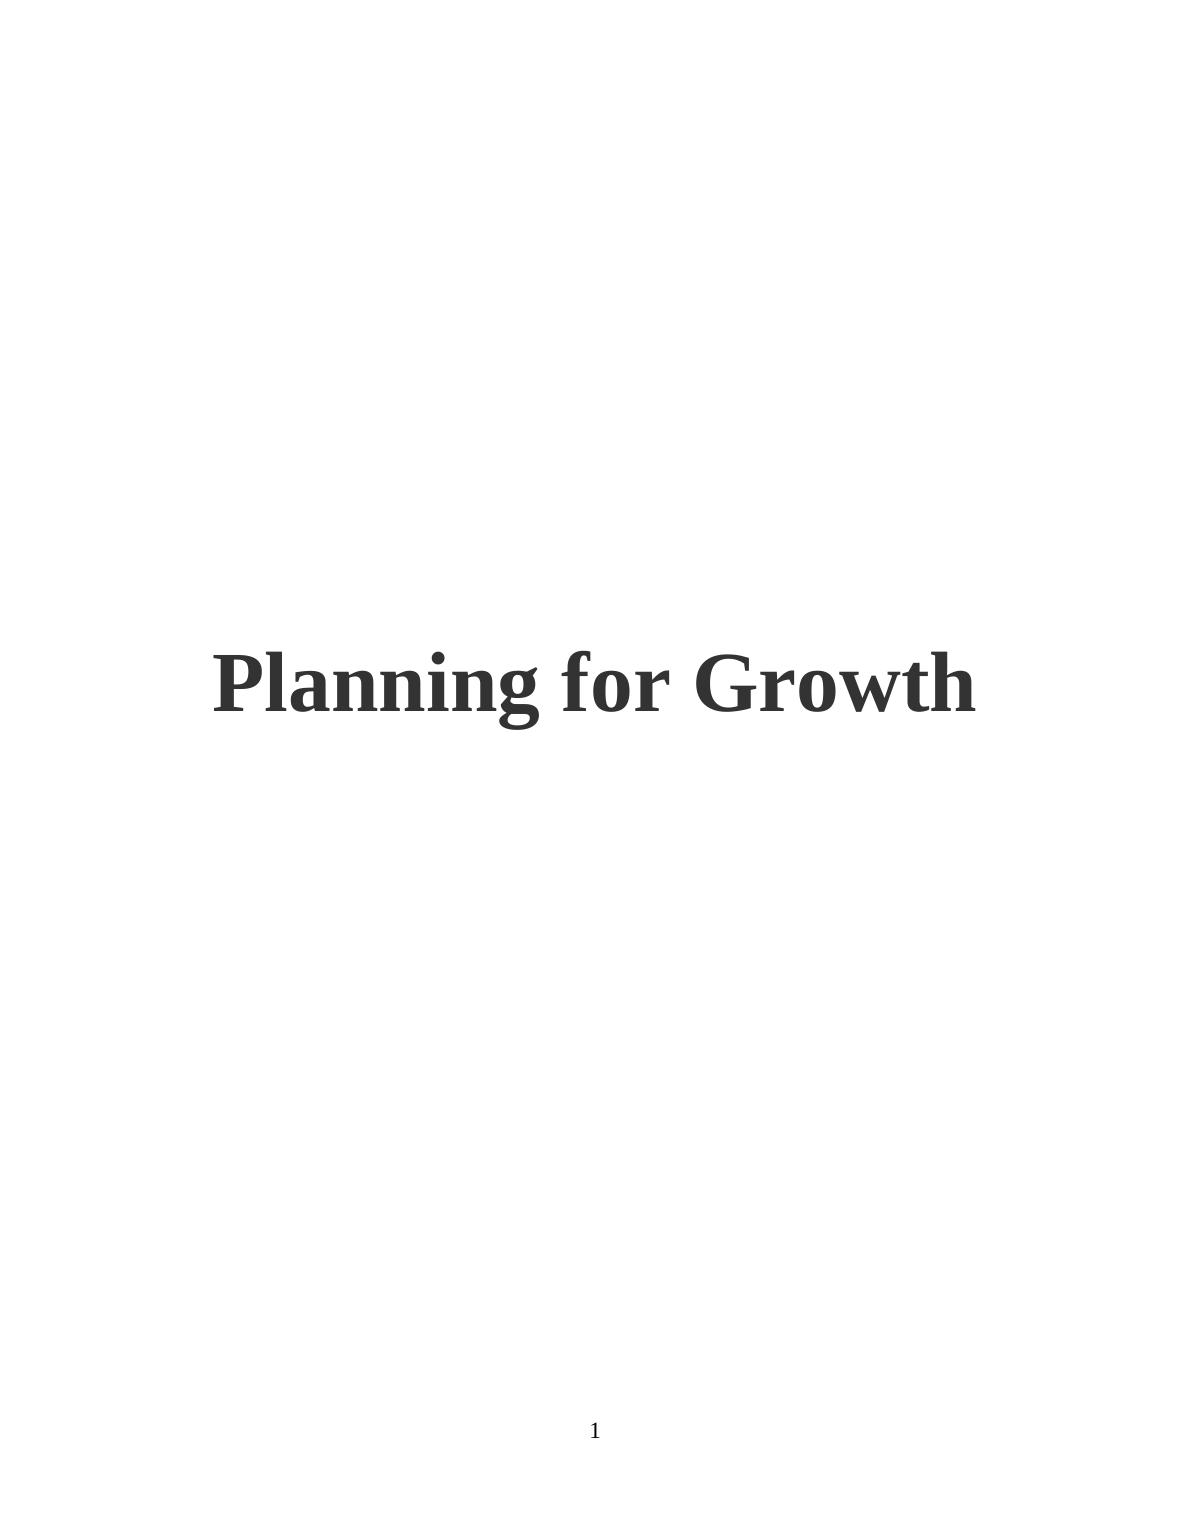 Planning for Growth Contents INTRODUCTION 3 TASK 13 P1 Key considerations for evaluating growth opportunities 3 P2 Opportunities for growth using Ansoff's growth vector matrix 5 TASK 26 P3 Business pl_1